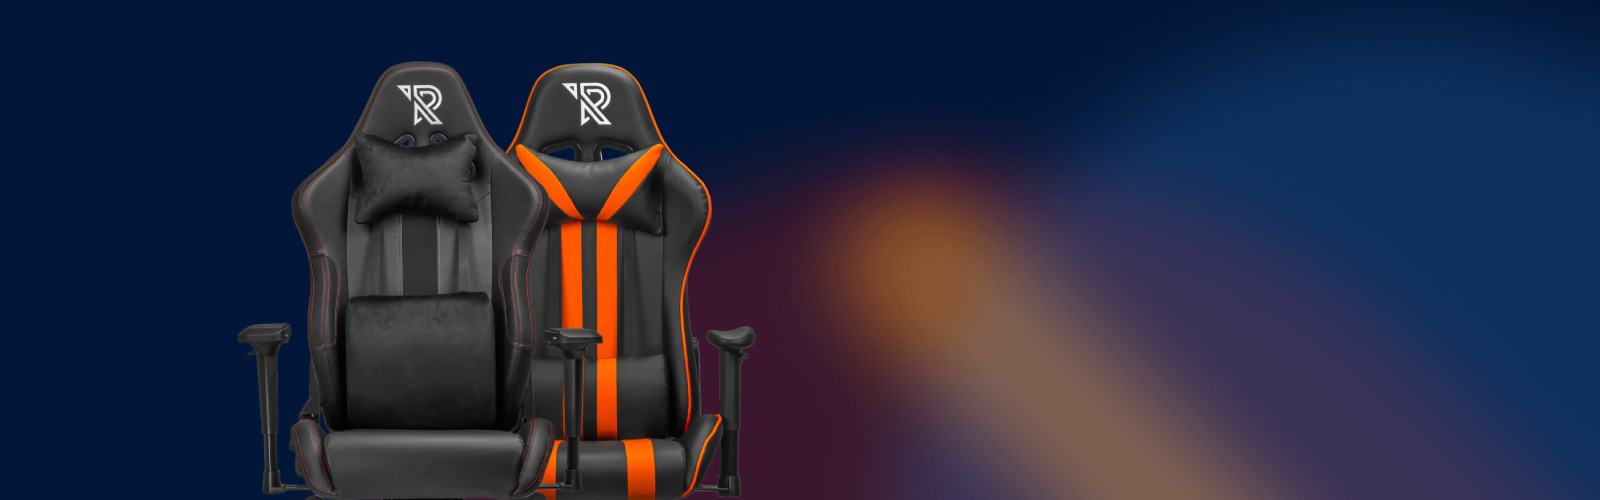 Gaming chair for tall and heavier people